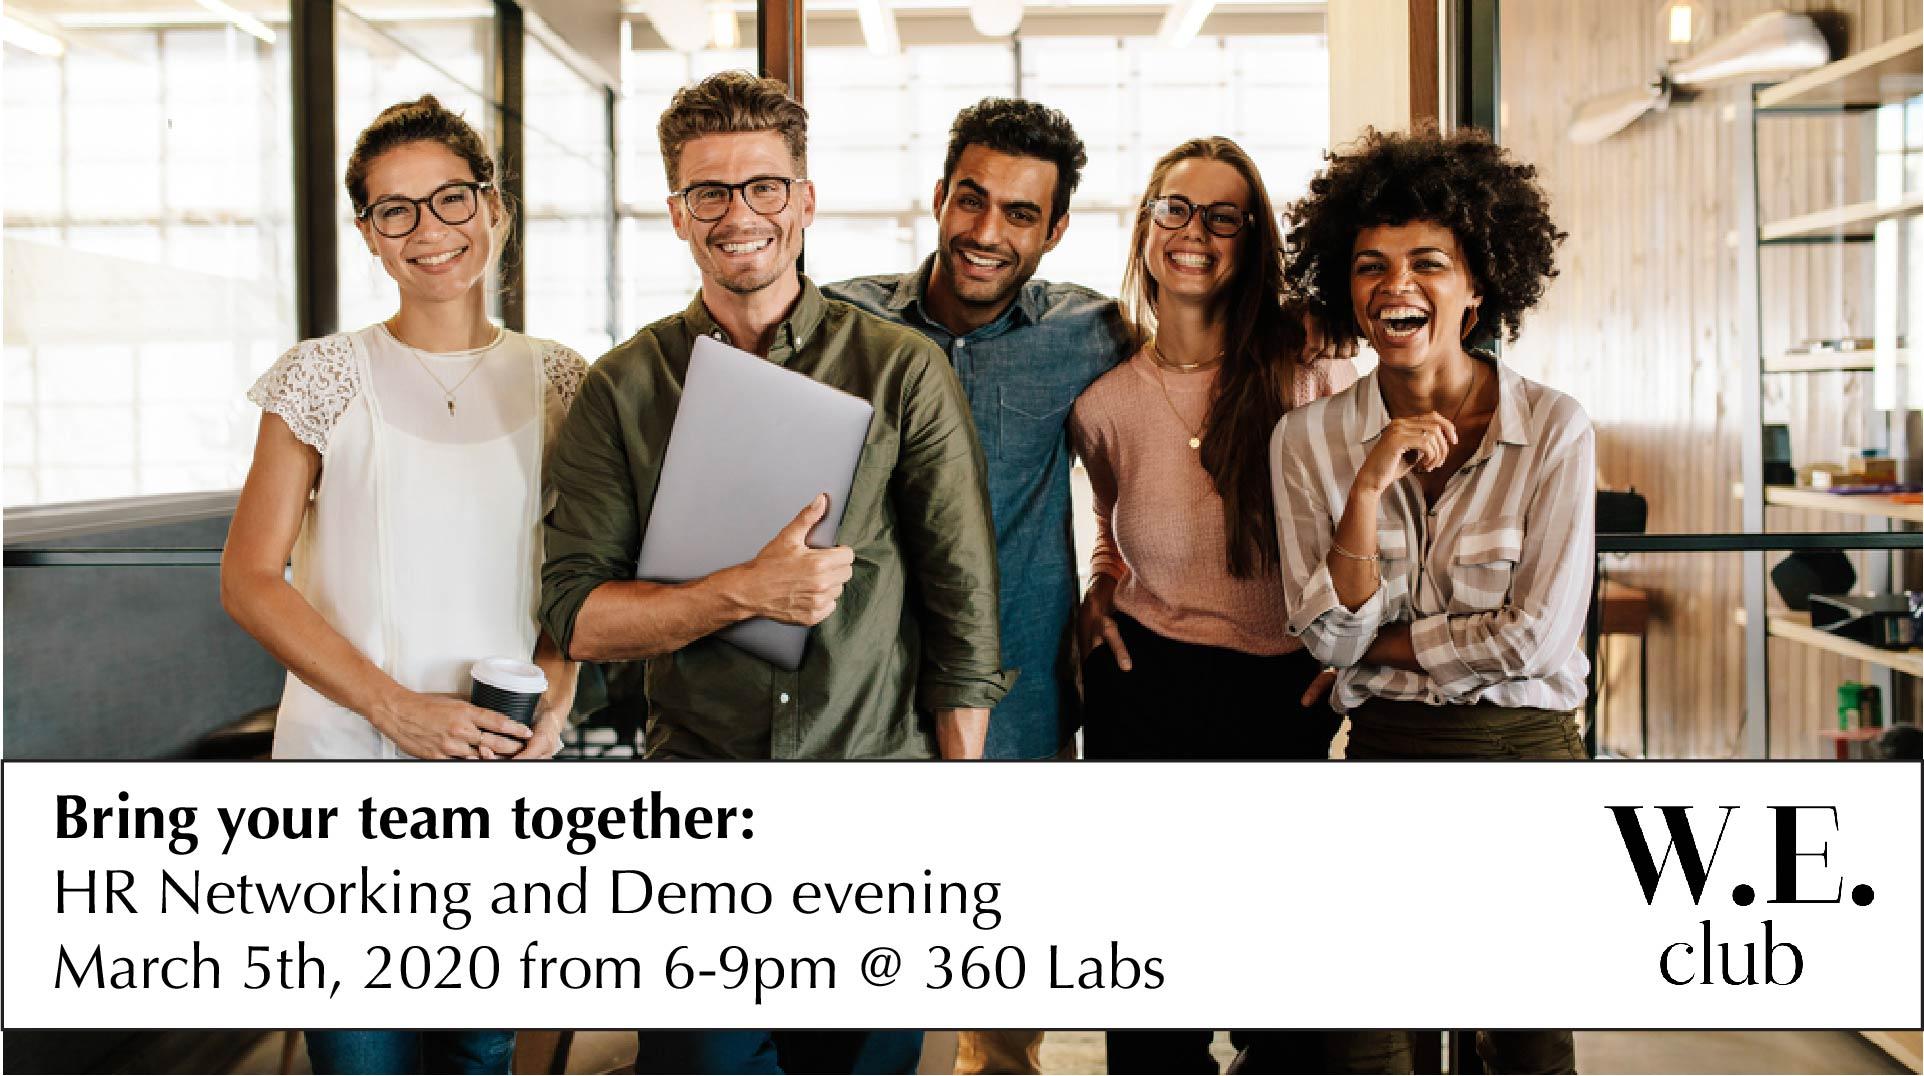 Bring your team together: HR networking and Demo evening with W.E. Club